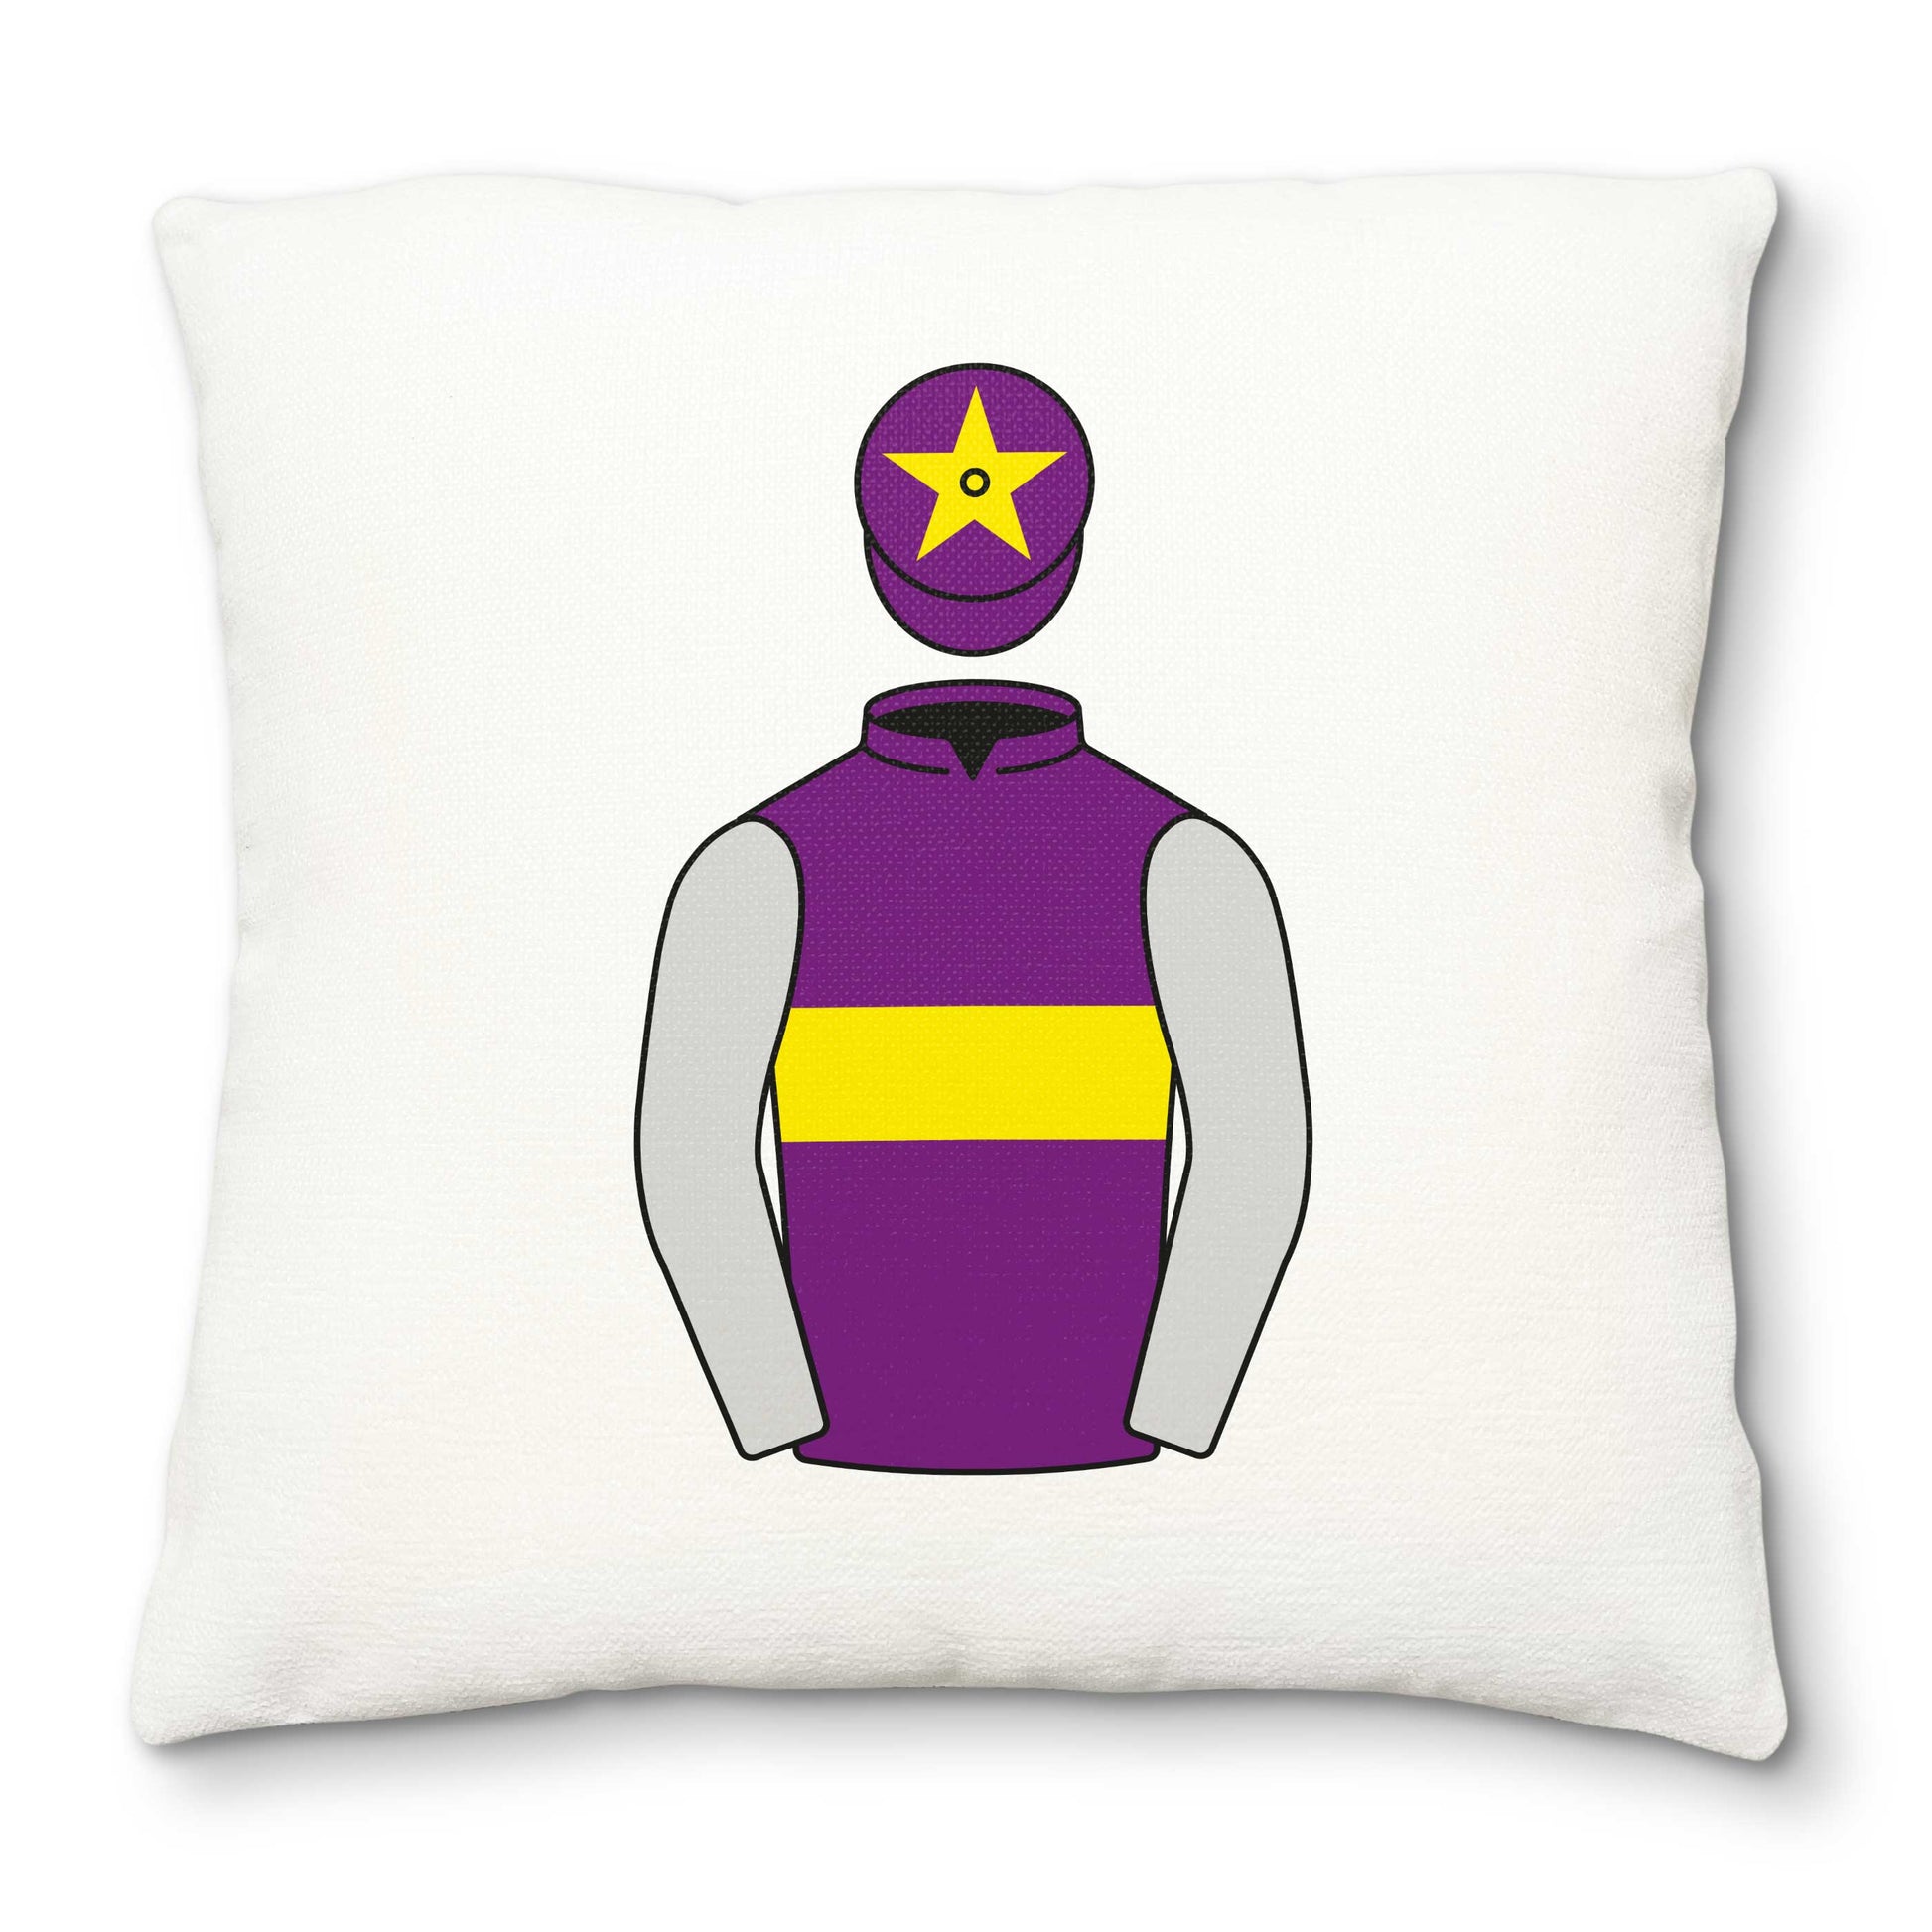 Toberona Partnership Deluxe Cushion Cover - Deluxe Cushion Cover - Hacked Up